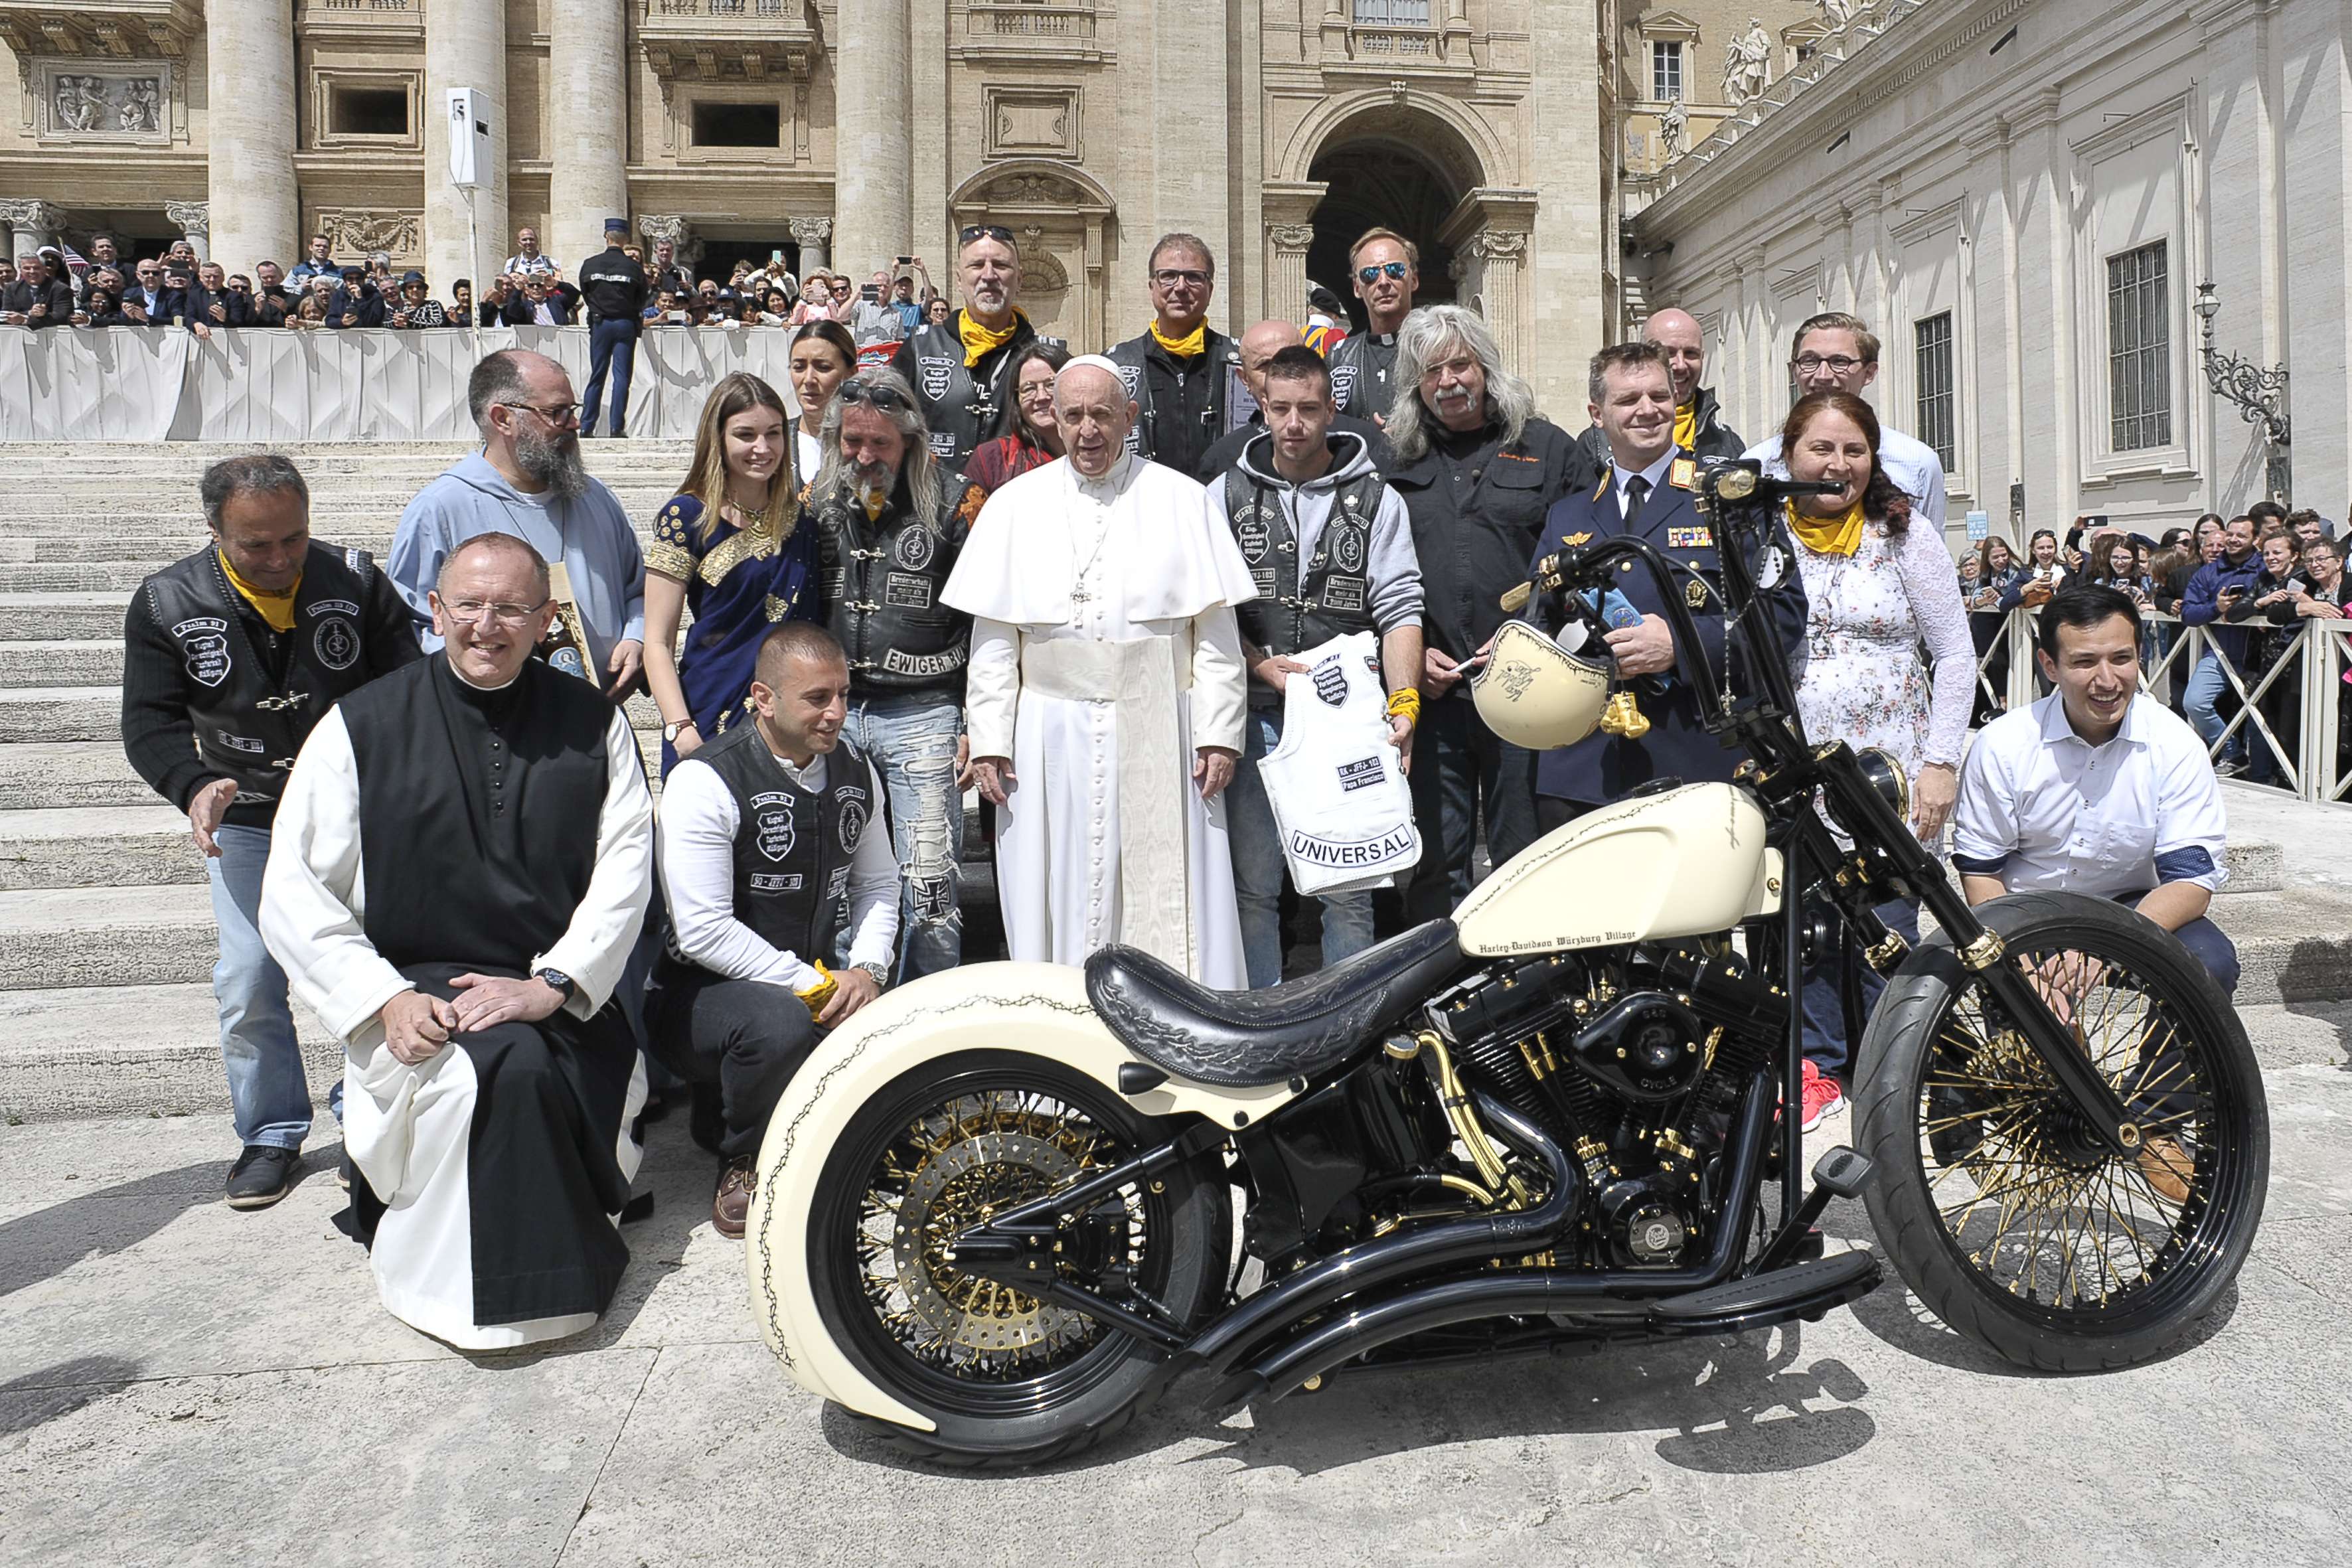 Motorcycle, Papal motorcycle to be auctioned for charity, ClassicCars.com Journal